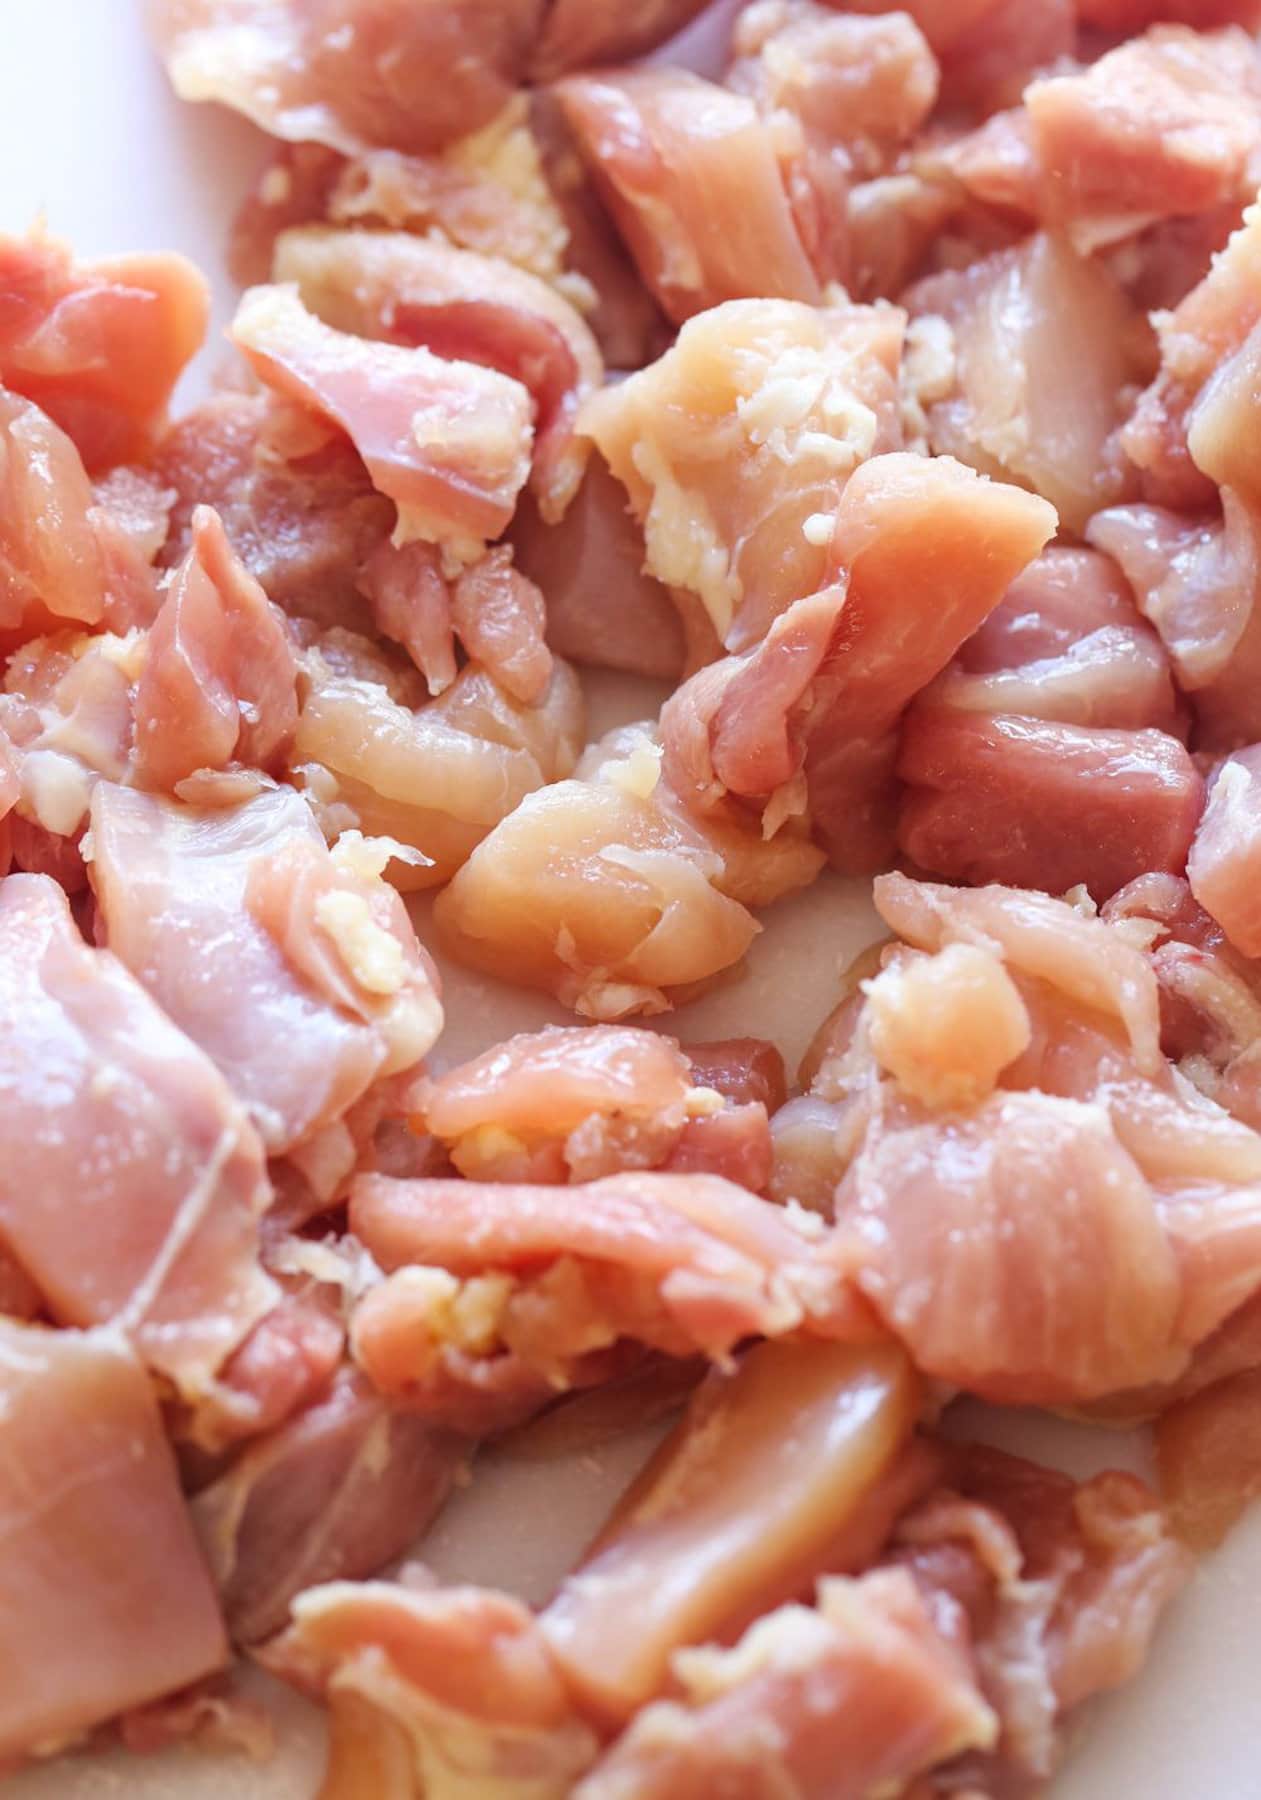 Raw diced chicken prepared to cook.